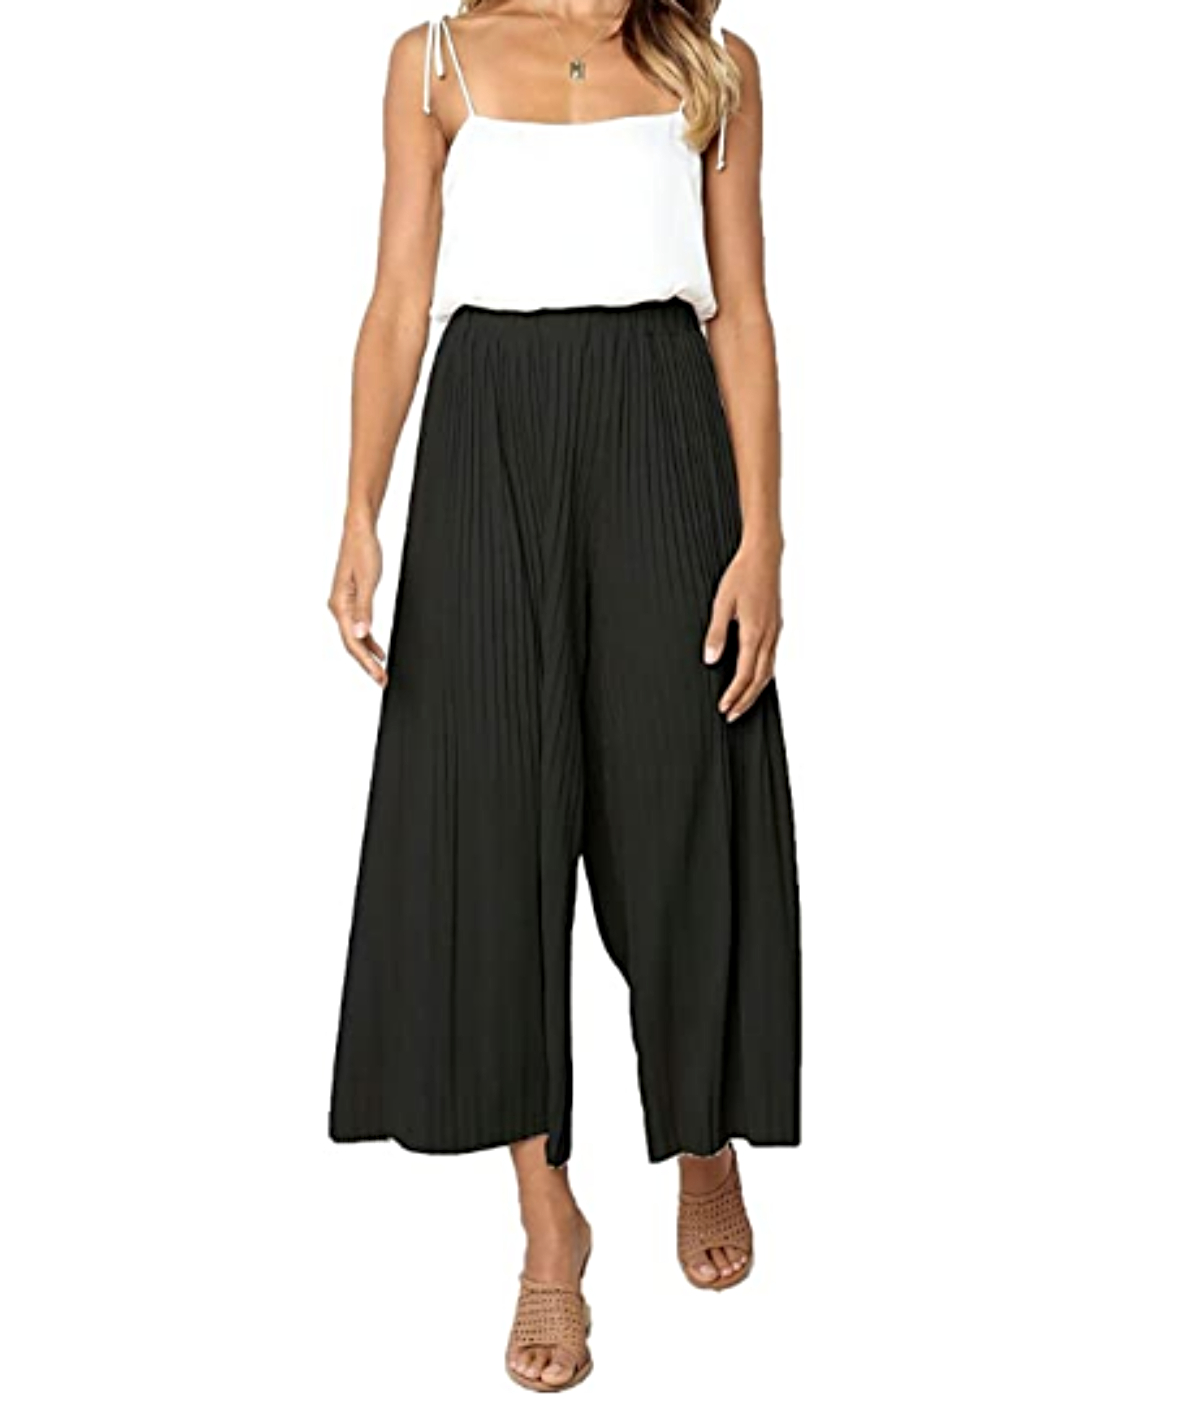 HZSONNE Flowy Pants Will Have You Looking Hamptons-Chic | Us Weekly